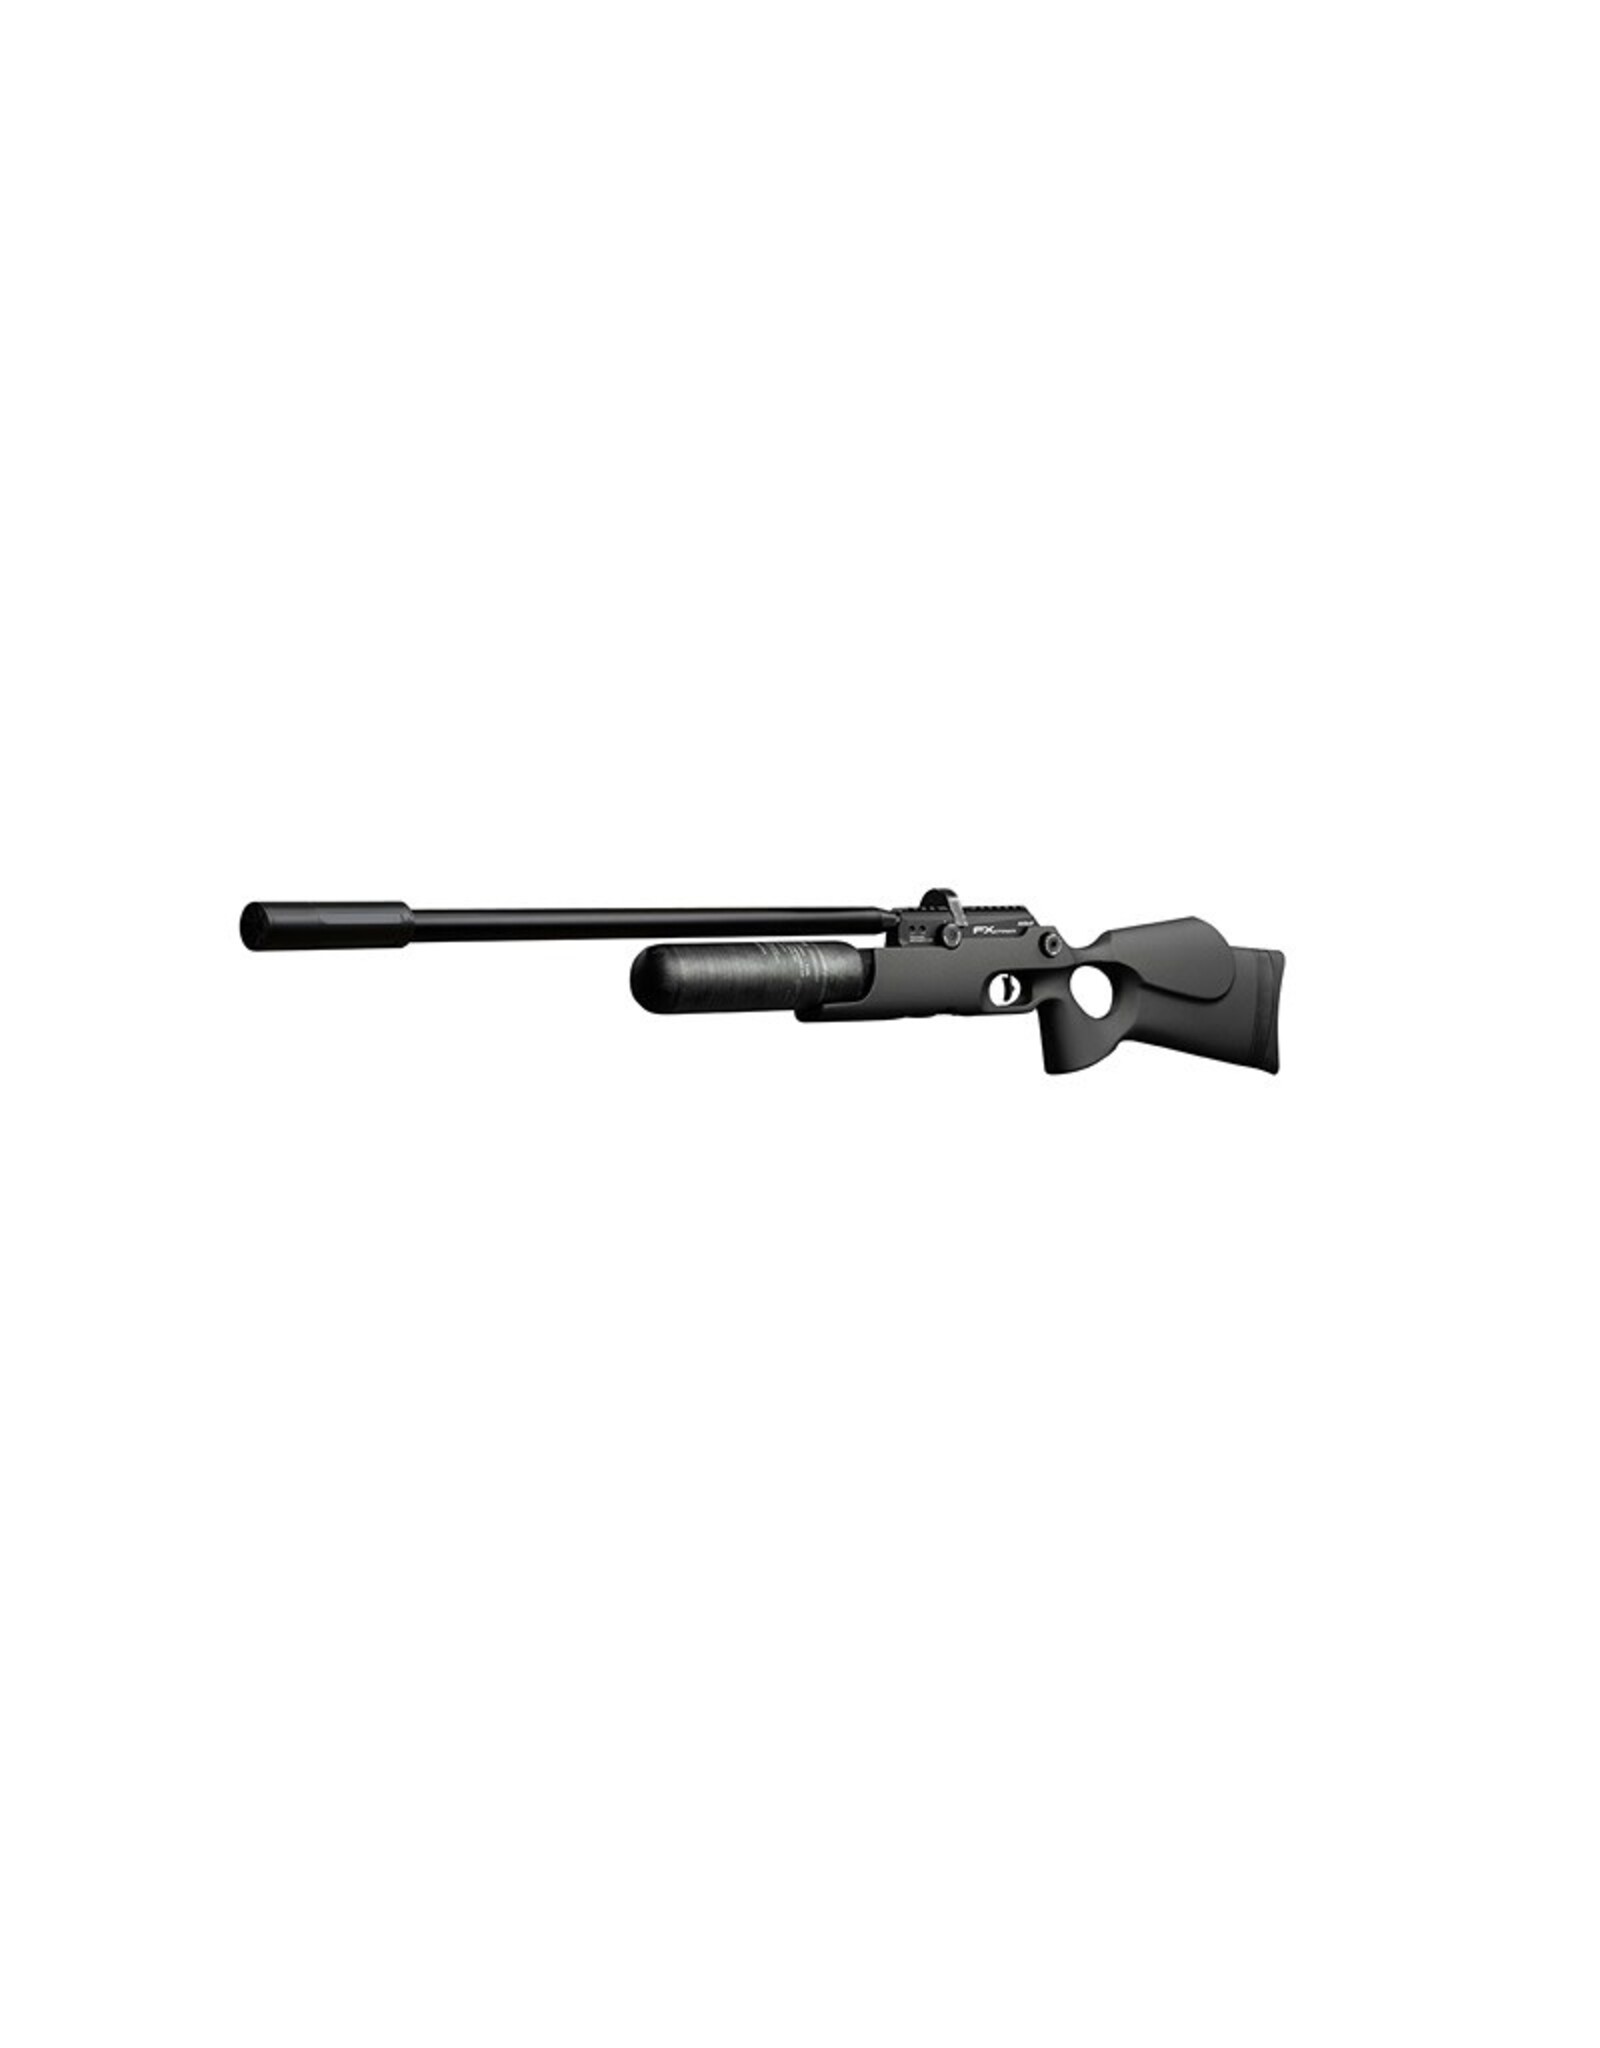 FX Airguns FX Crown MKII Standard Plus, Base Chassis Ready - 0.177 caliber